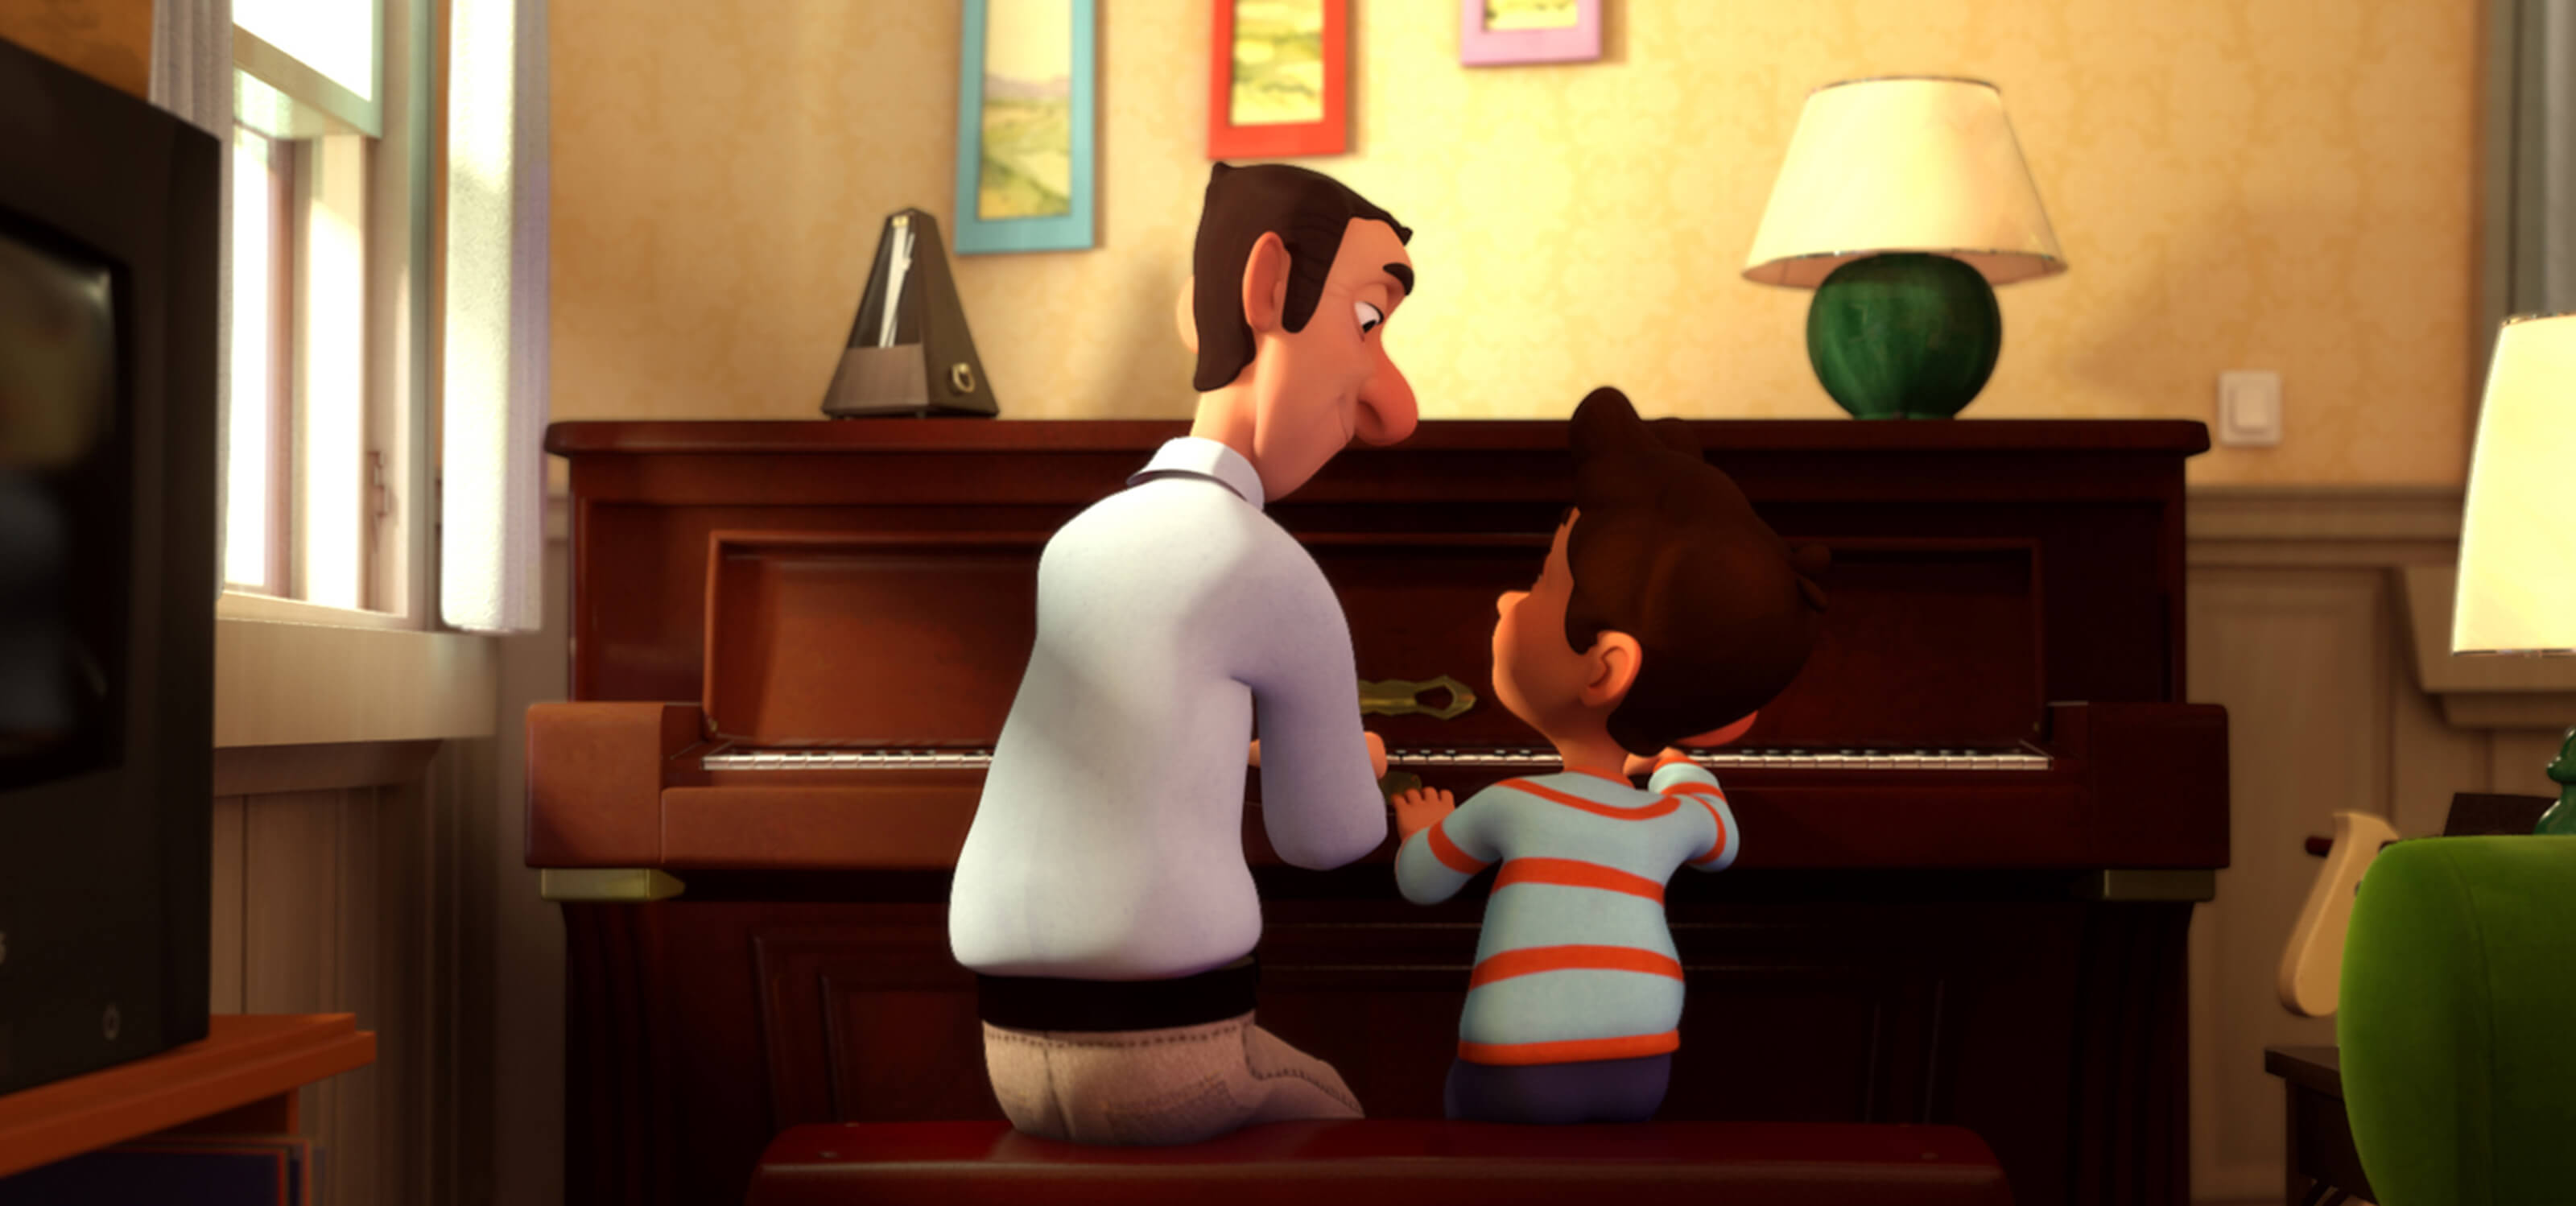 In a scene from DigiPen Europe-Bilbao student animation Arpeggio, a father watches his young son play the piano